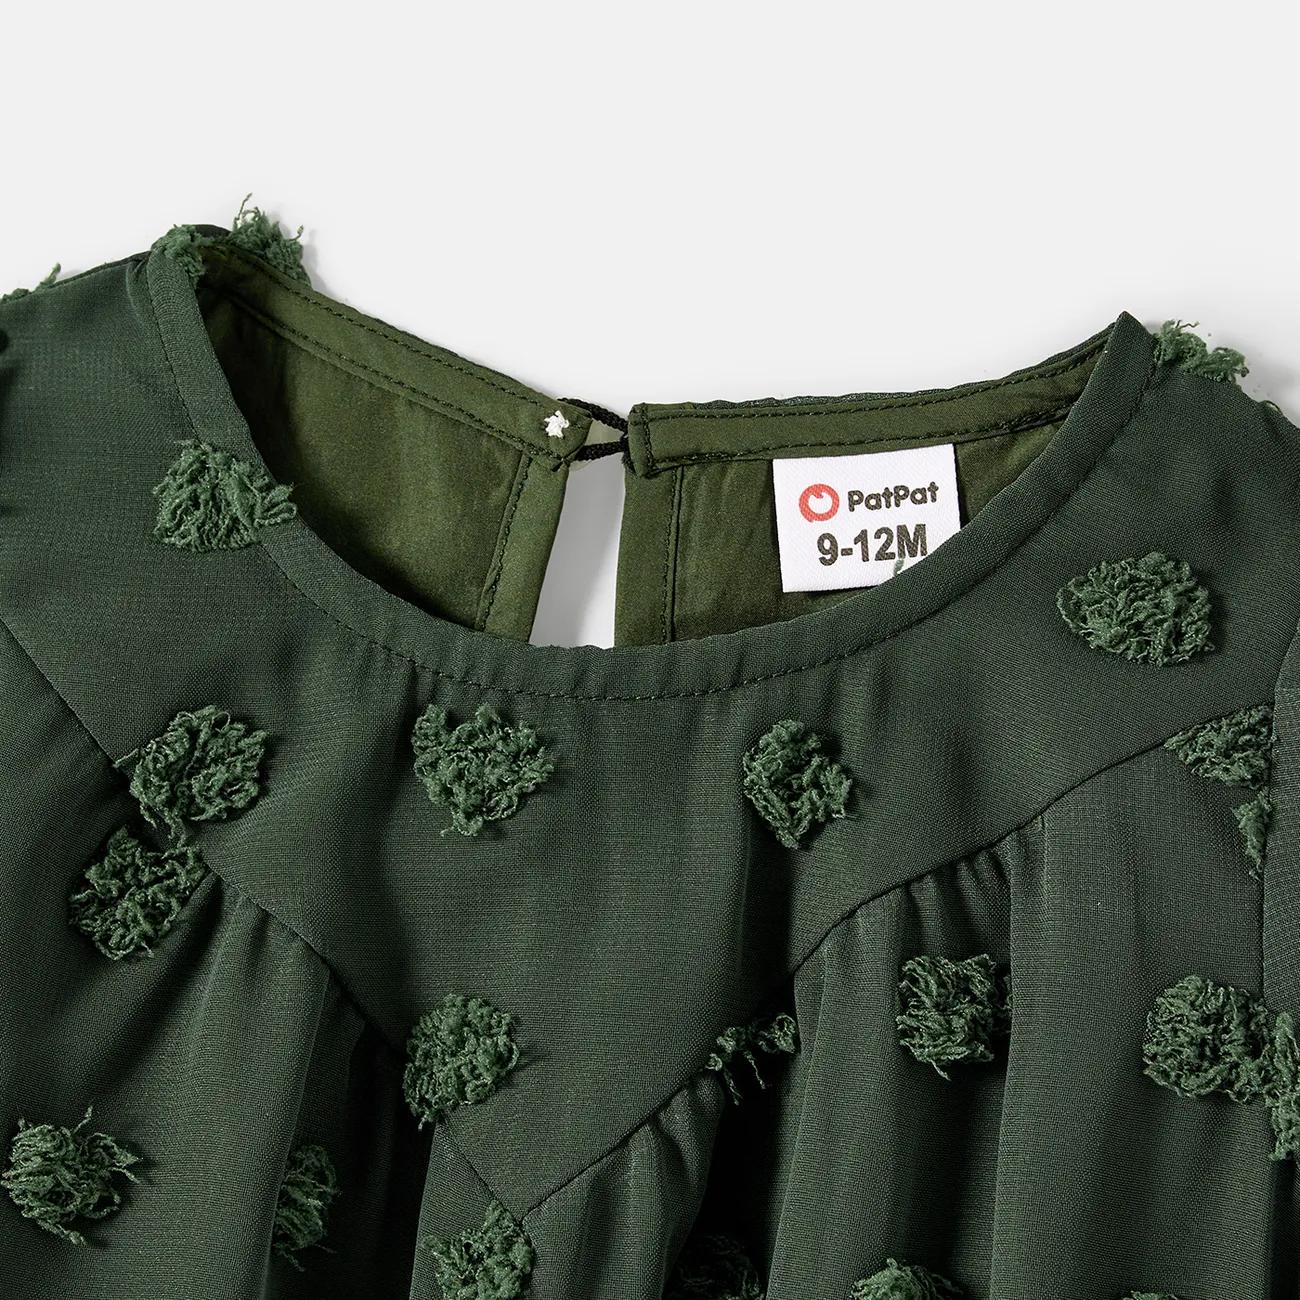 Family Matching Army Green Swiss Dots Cross Wrap V Neck Short-sleeve Dresses and Color Block T-shirts Sets Army green big image 1